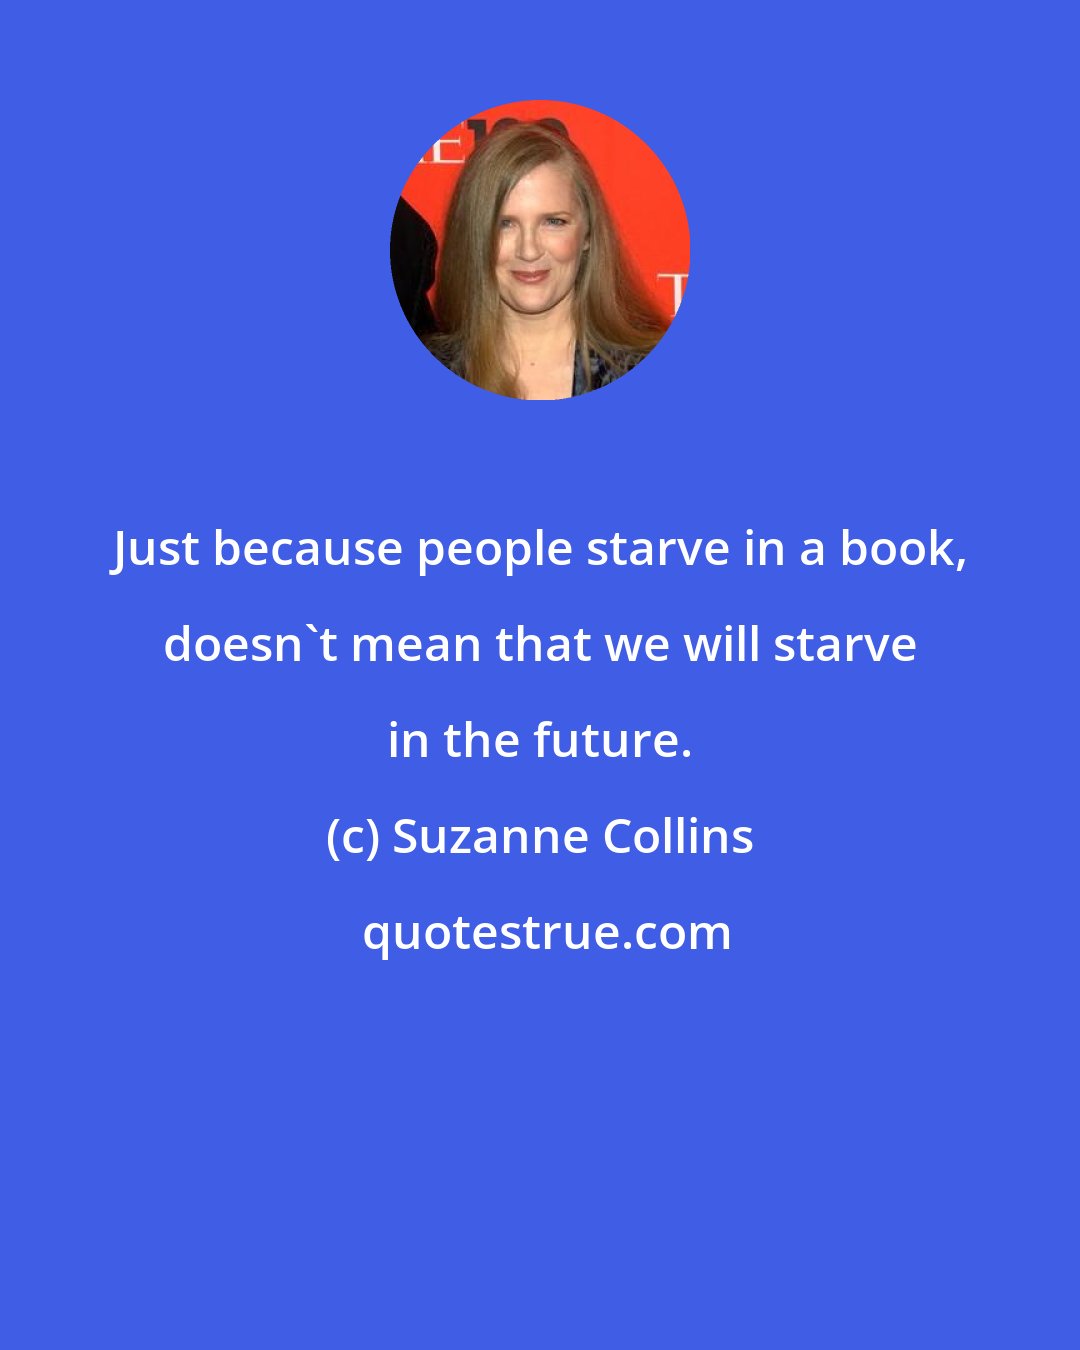 Suzanne Collins: Just because people starve in a book, doesn't mean that we will starve in the future.